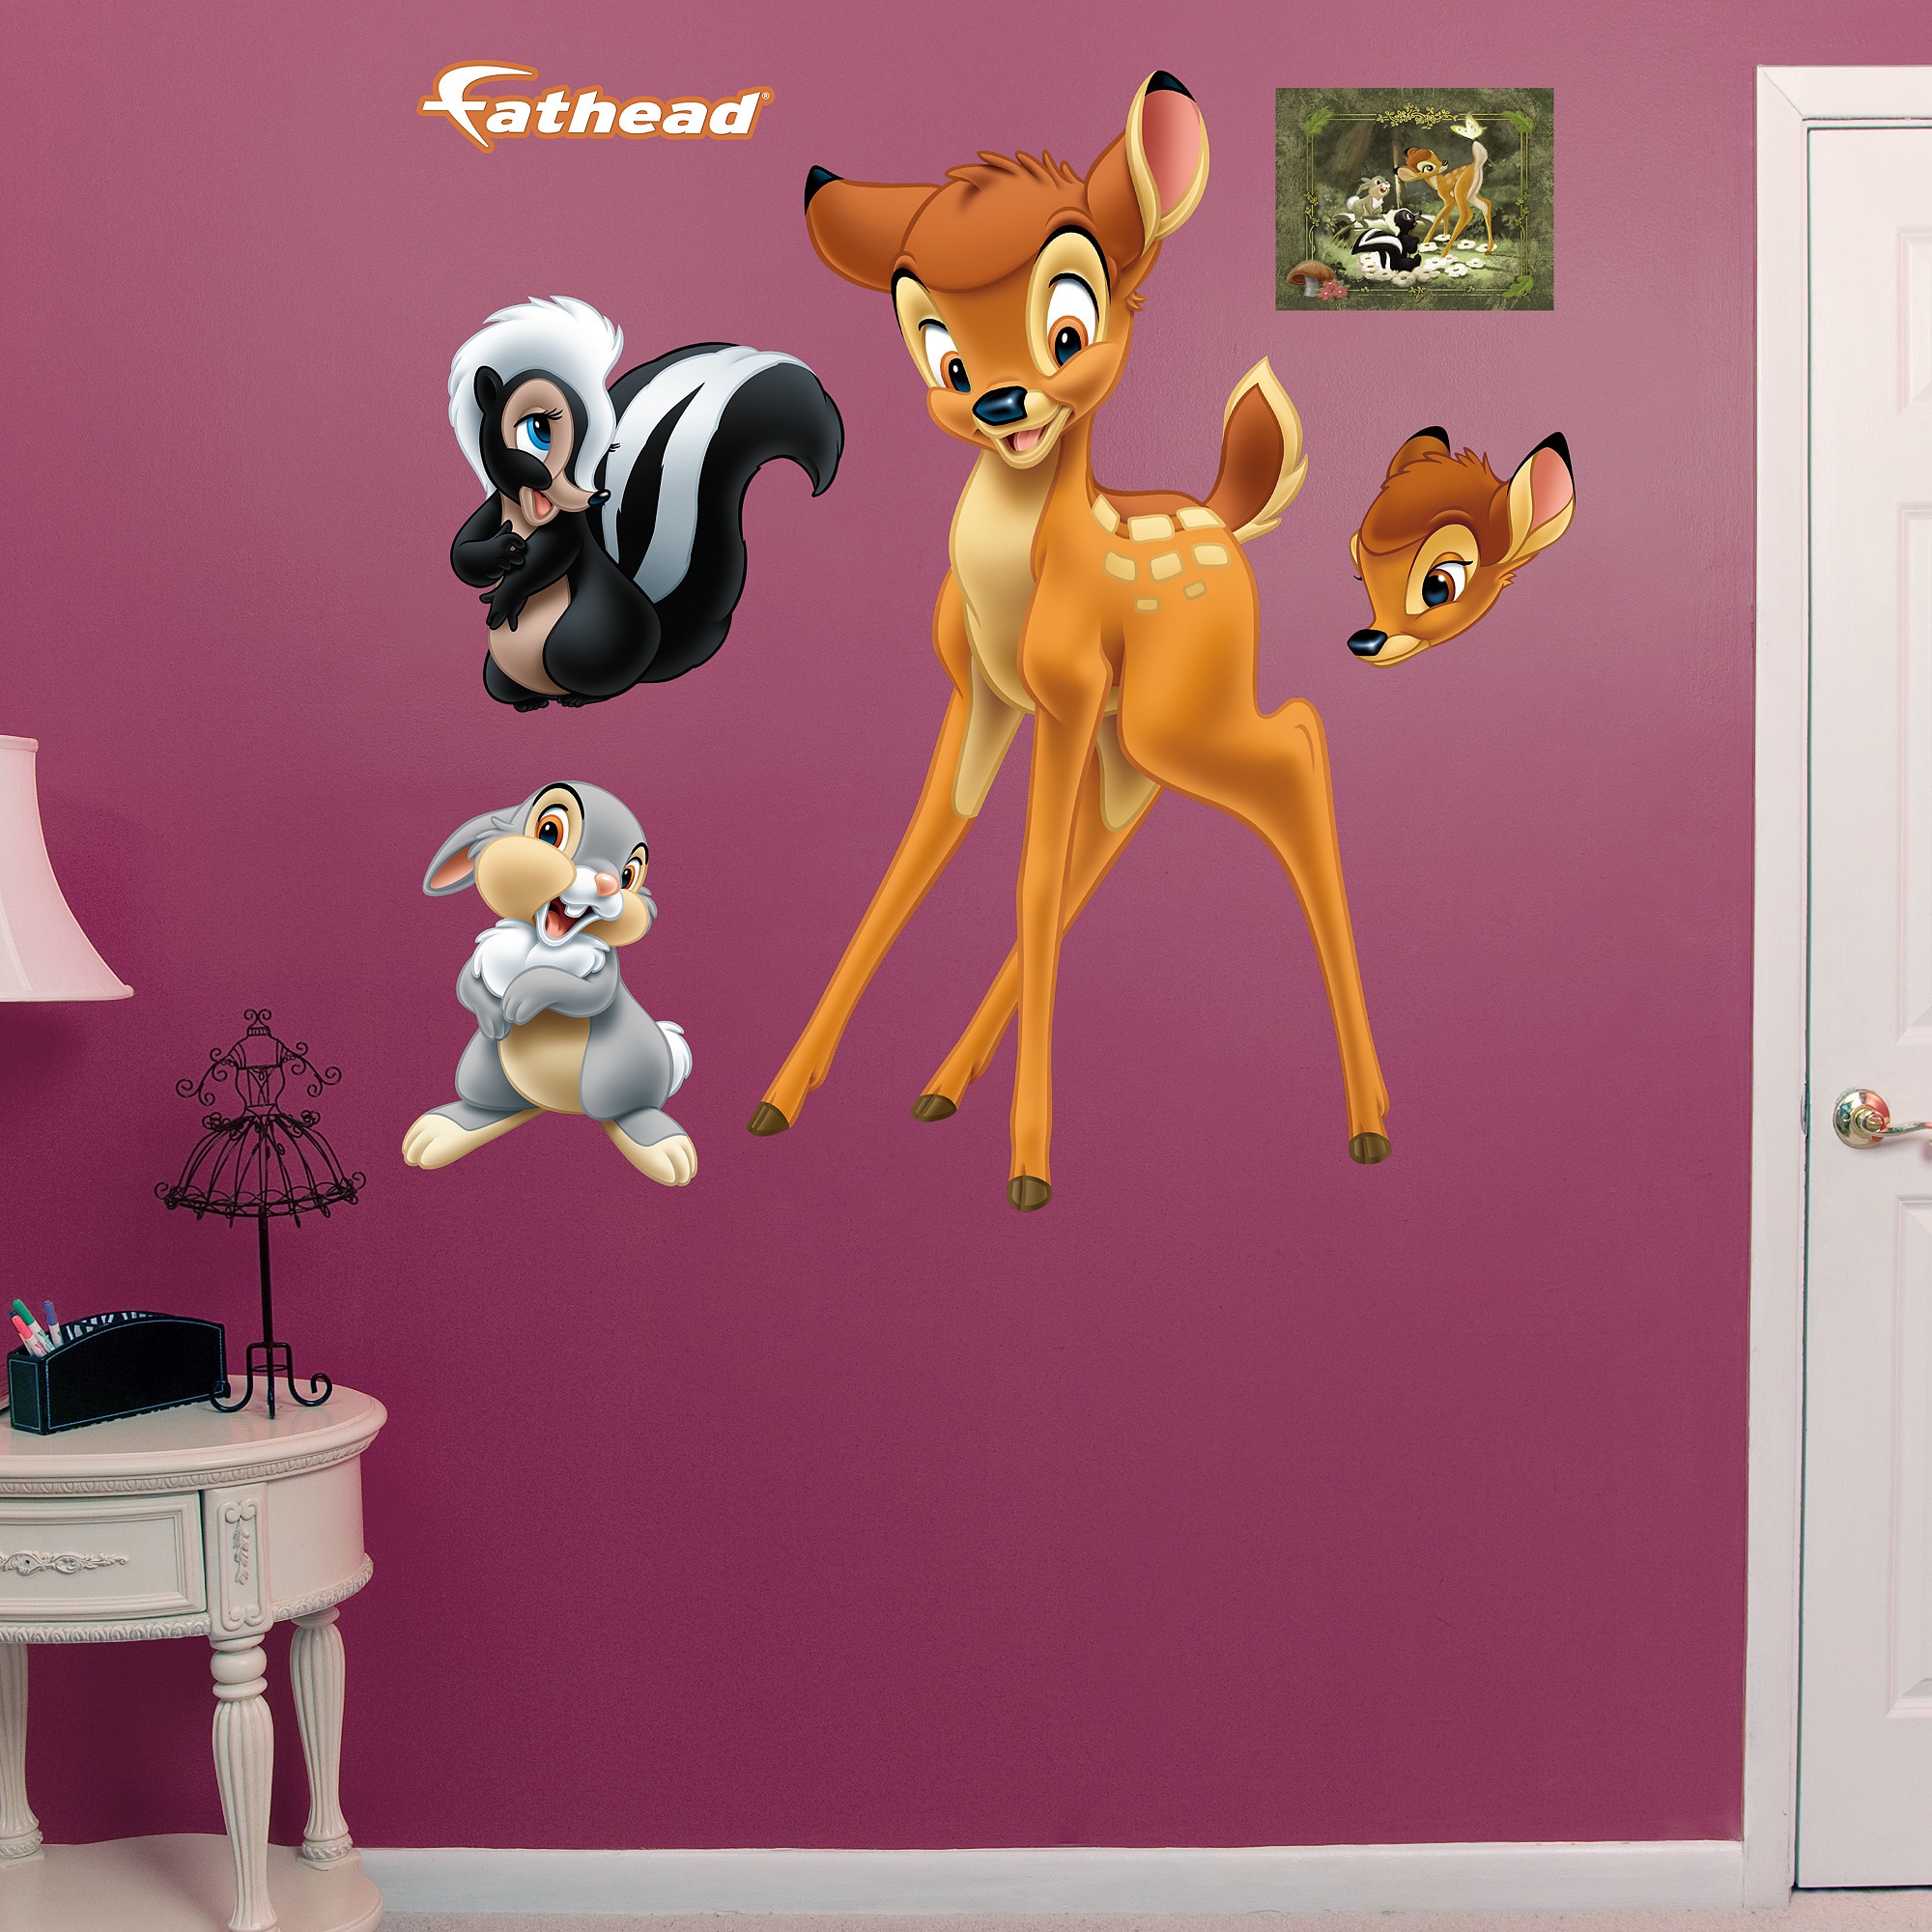 Fathead Dry Erase Sheets -Two Pack - Giant Removable Wall Decal